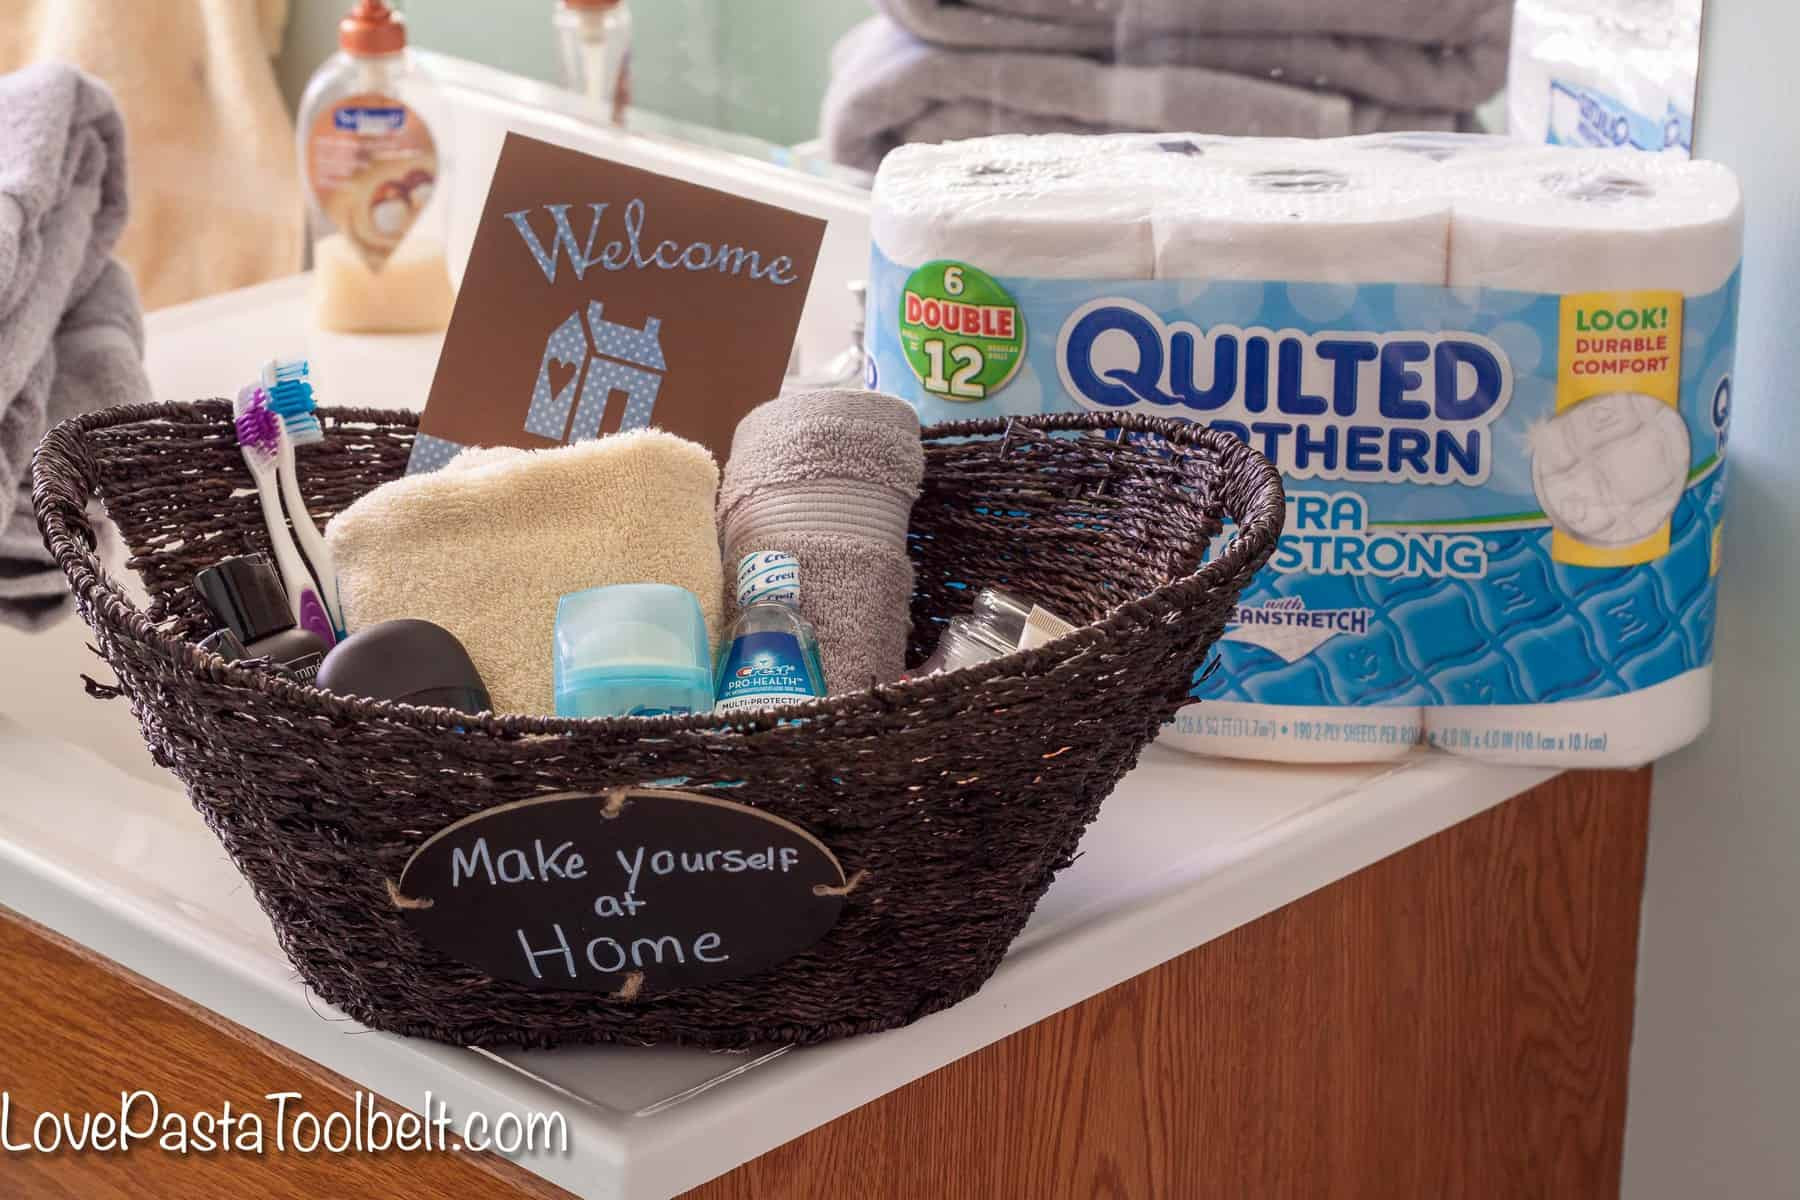 Welcome Home Gift Basket Ideas
 Guest Bathroom Wel e Basket Love Pasta and a Tool Belt